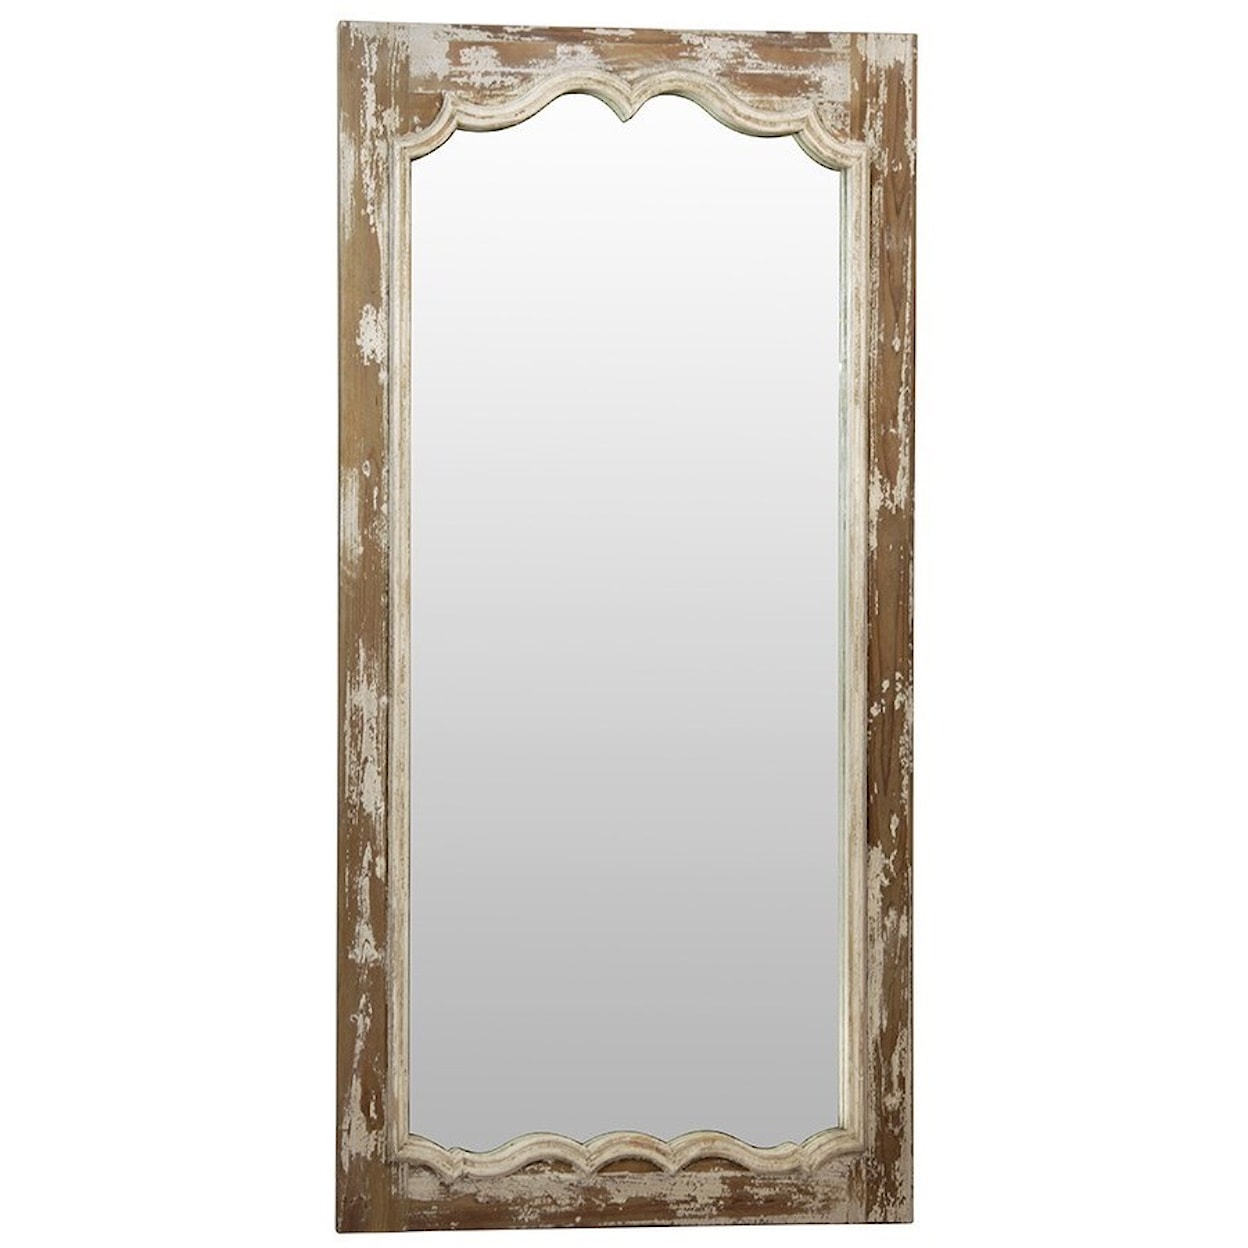 Dovetail Furniture Mirrors - Dovetail Levy Wall Mirror